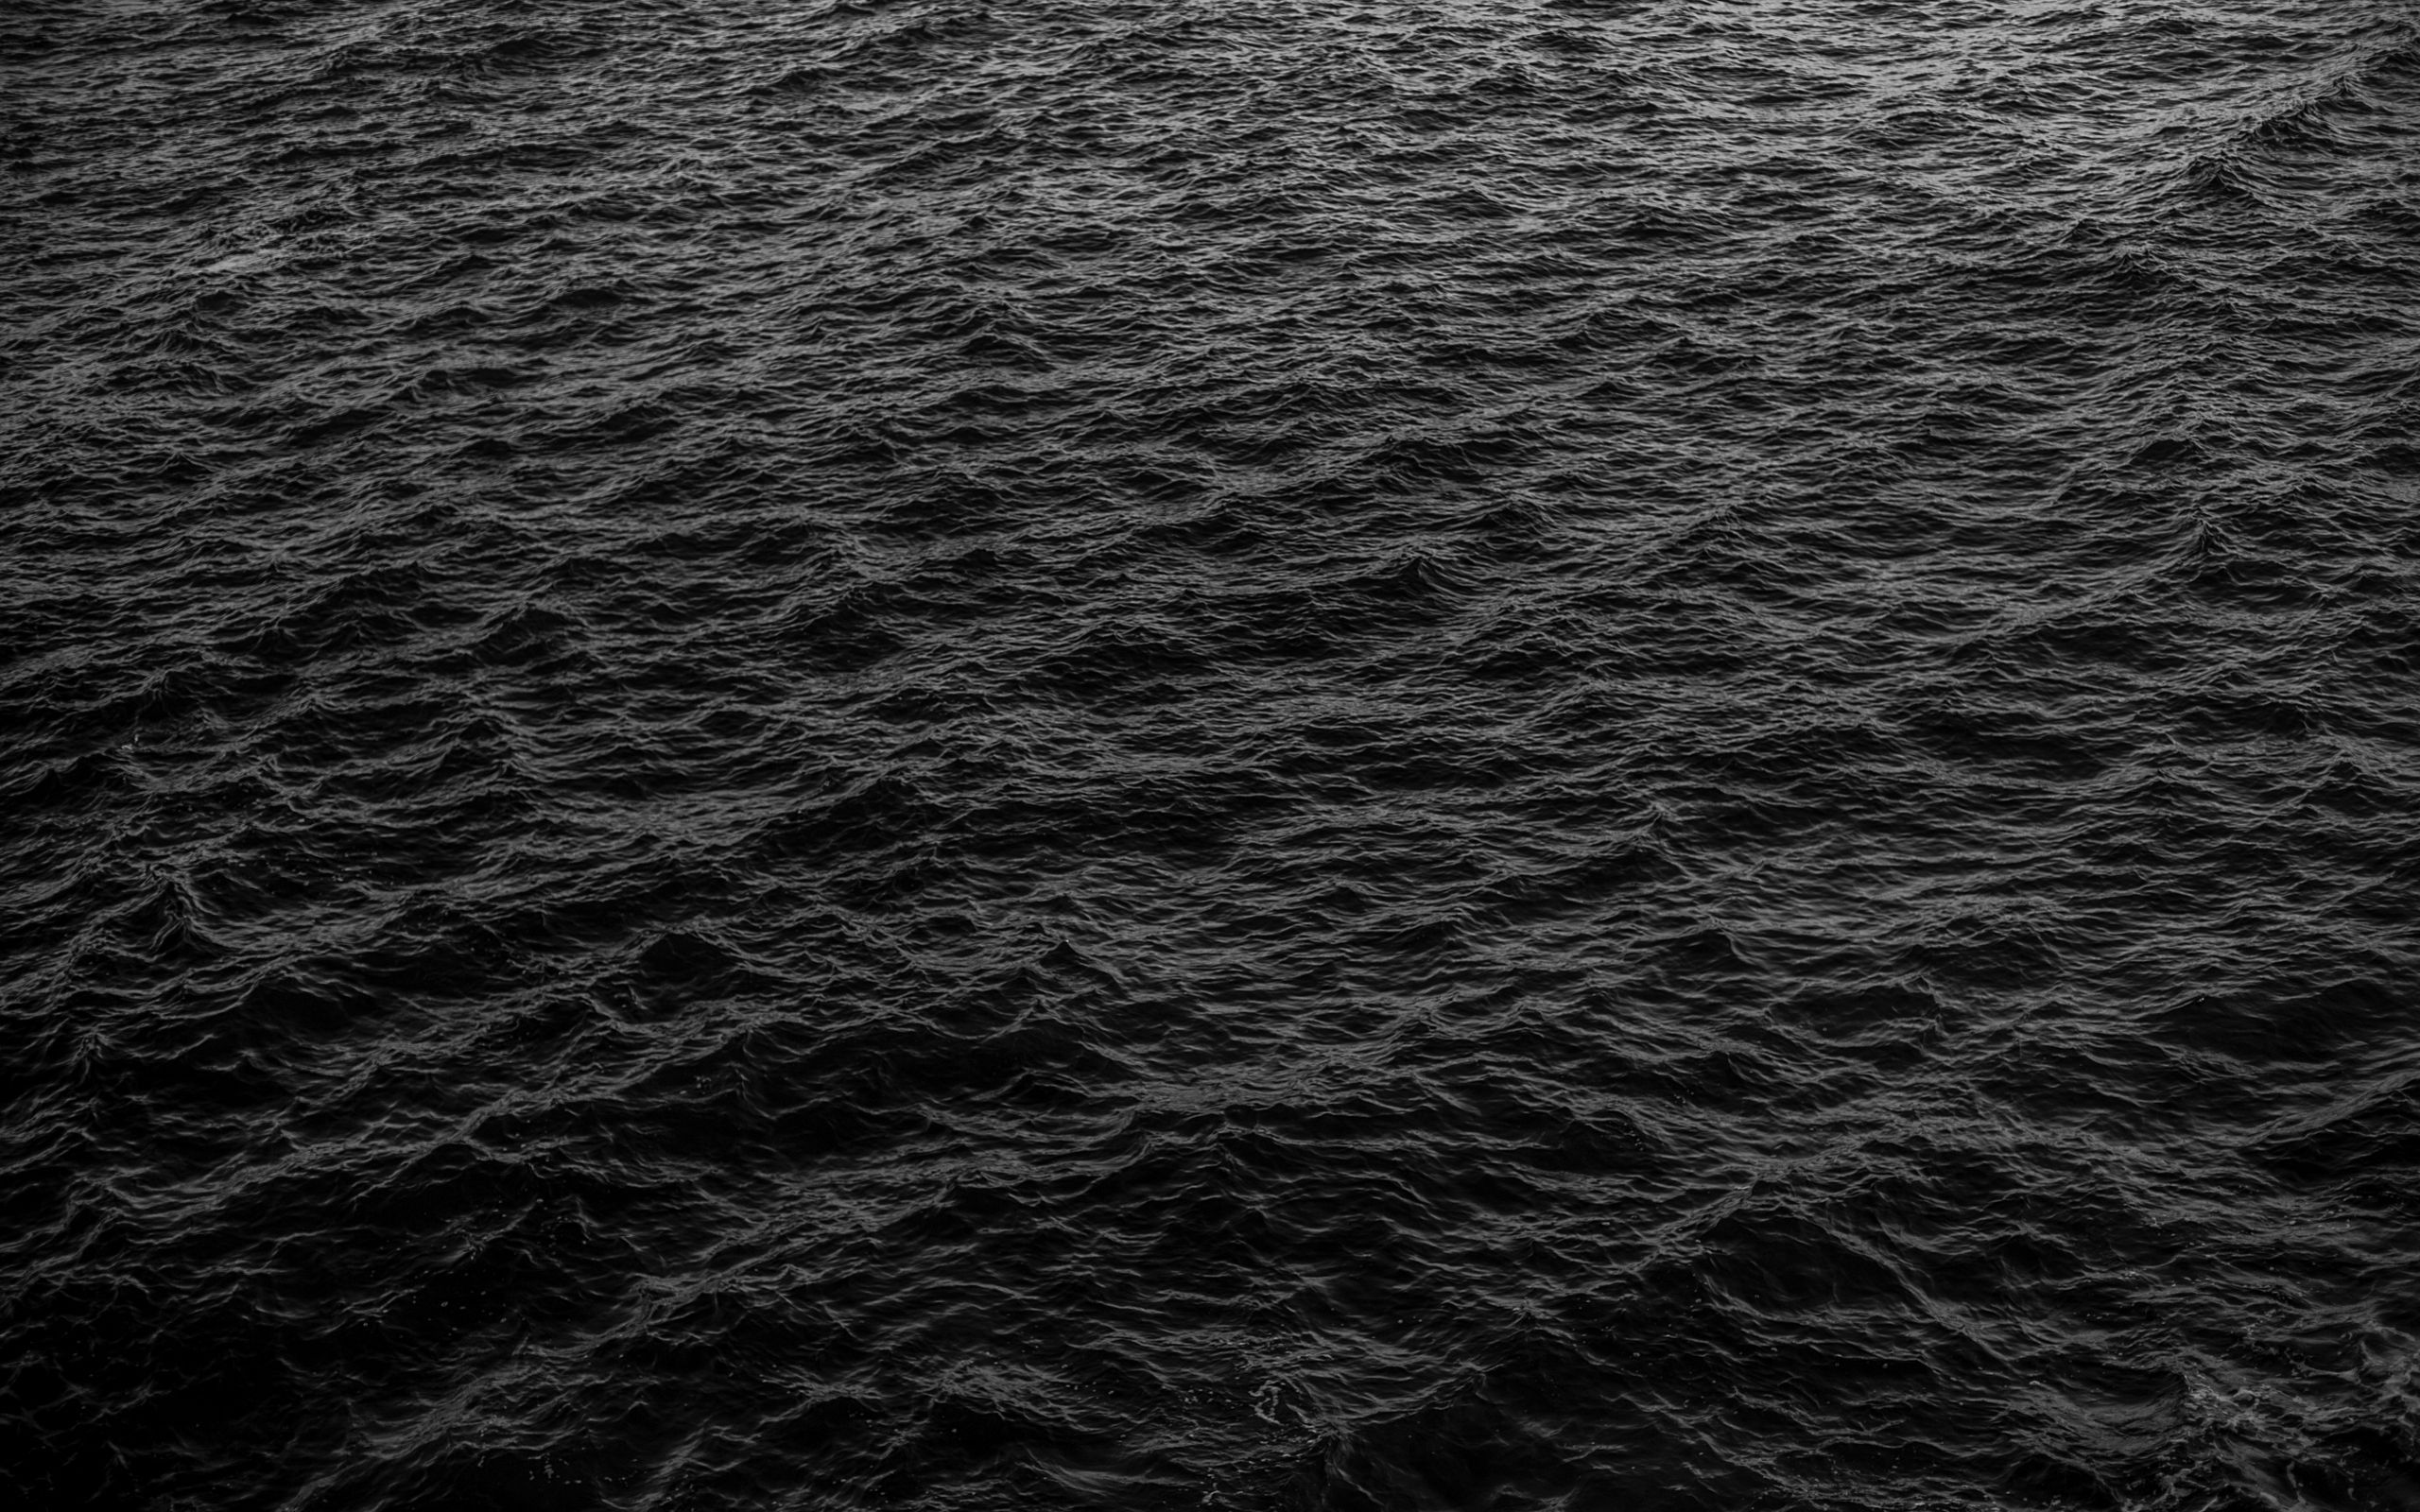 Download wallpaper 2560x1600 sea, waves, black, surface, water widescreen 16:10 HD background